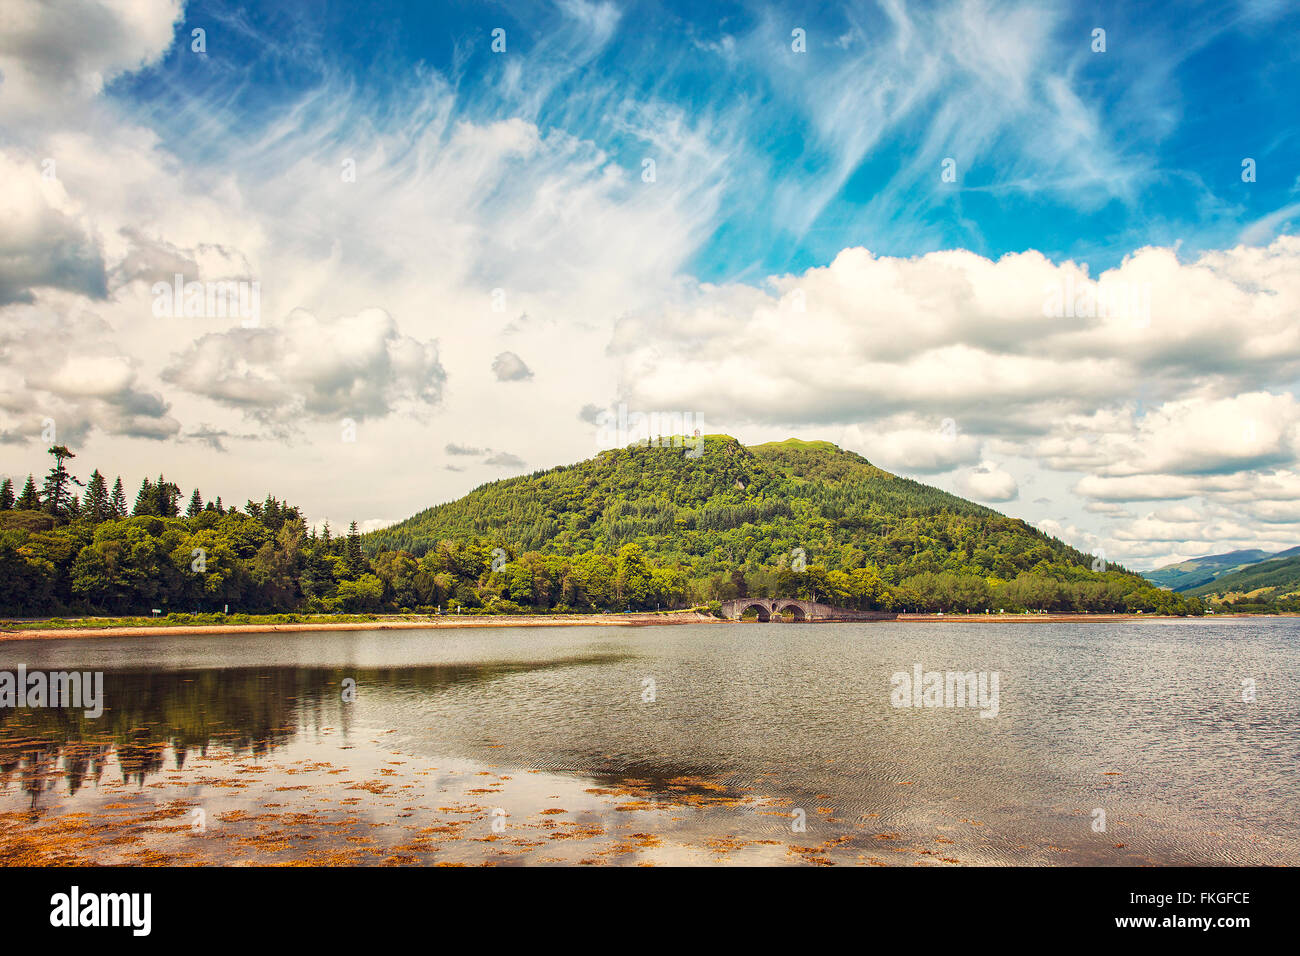 Image of Loch (lake) Fyne in the Scottish highlands, view from the village of Inveraray. Stock Photo